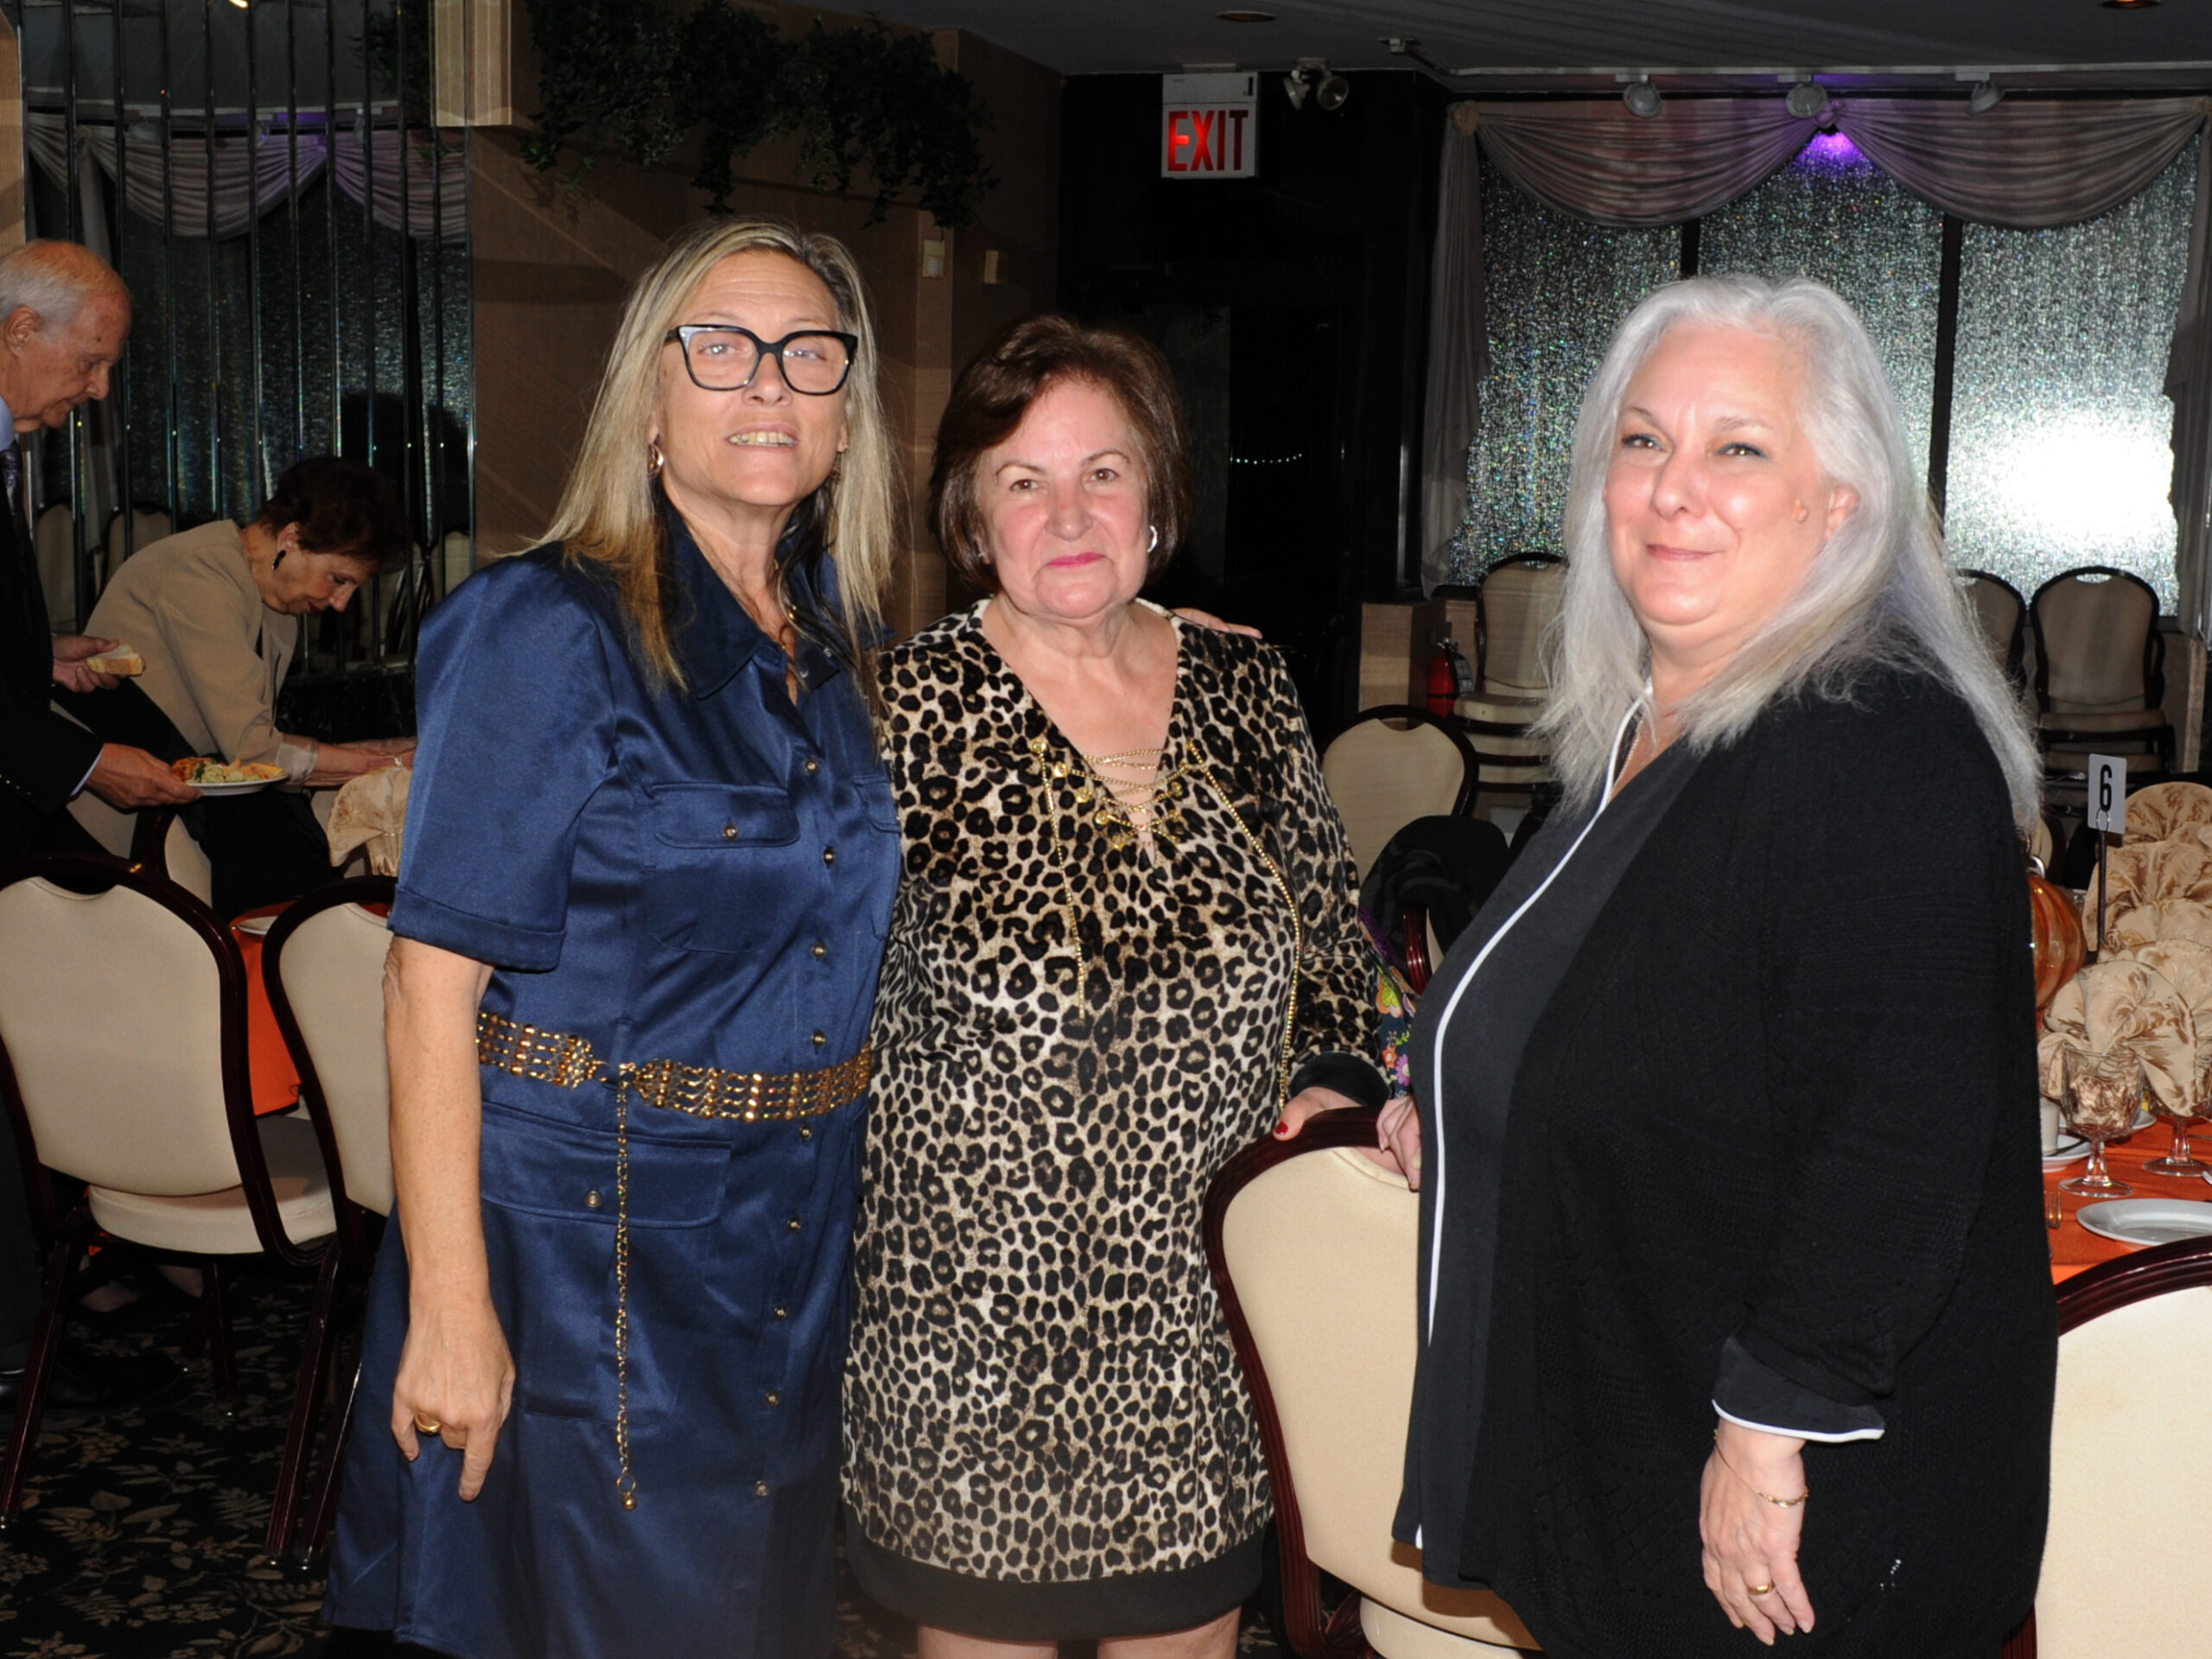 Photo from Dyker Heights Civic Association dinner